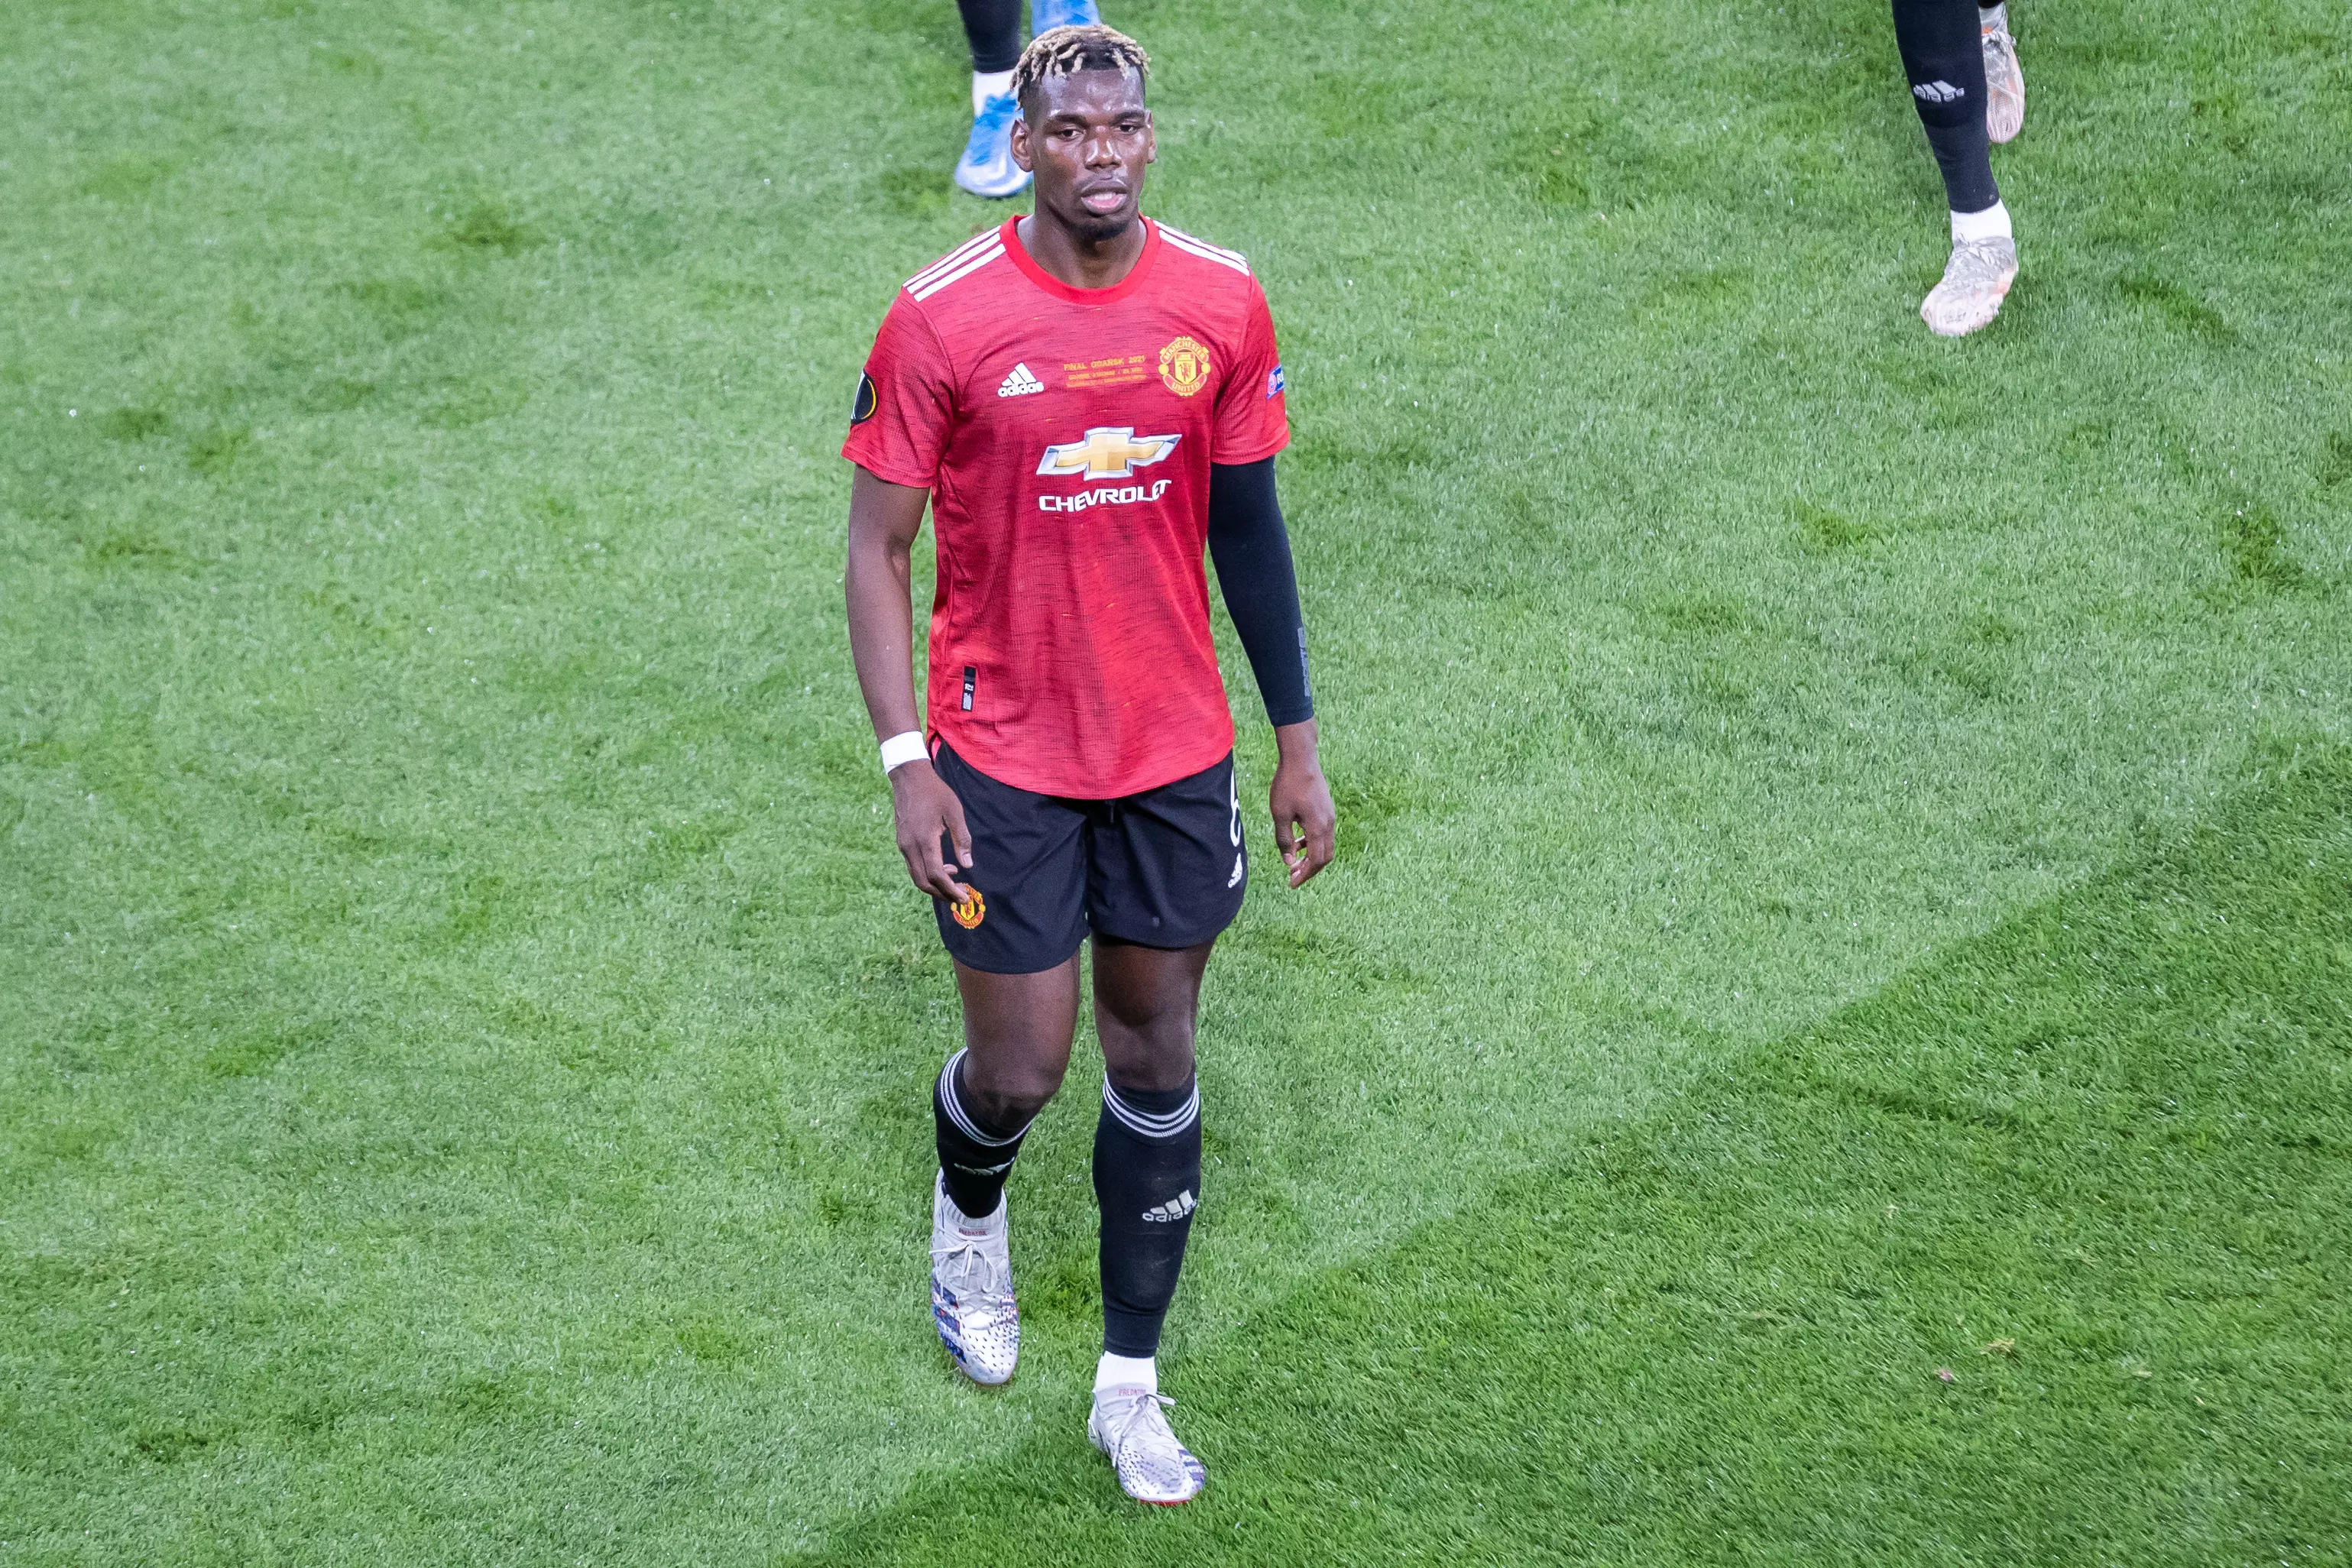 Pogba may have played his final game for United. Image: PA Images